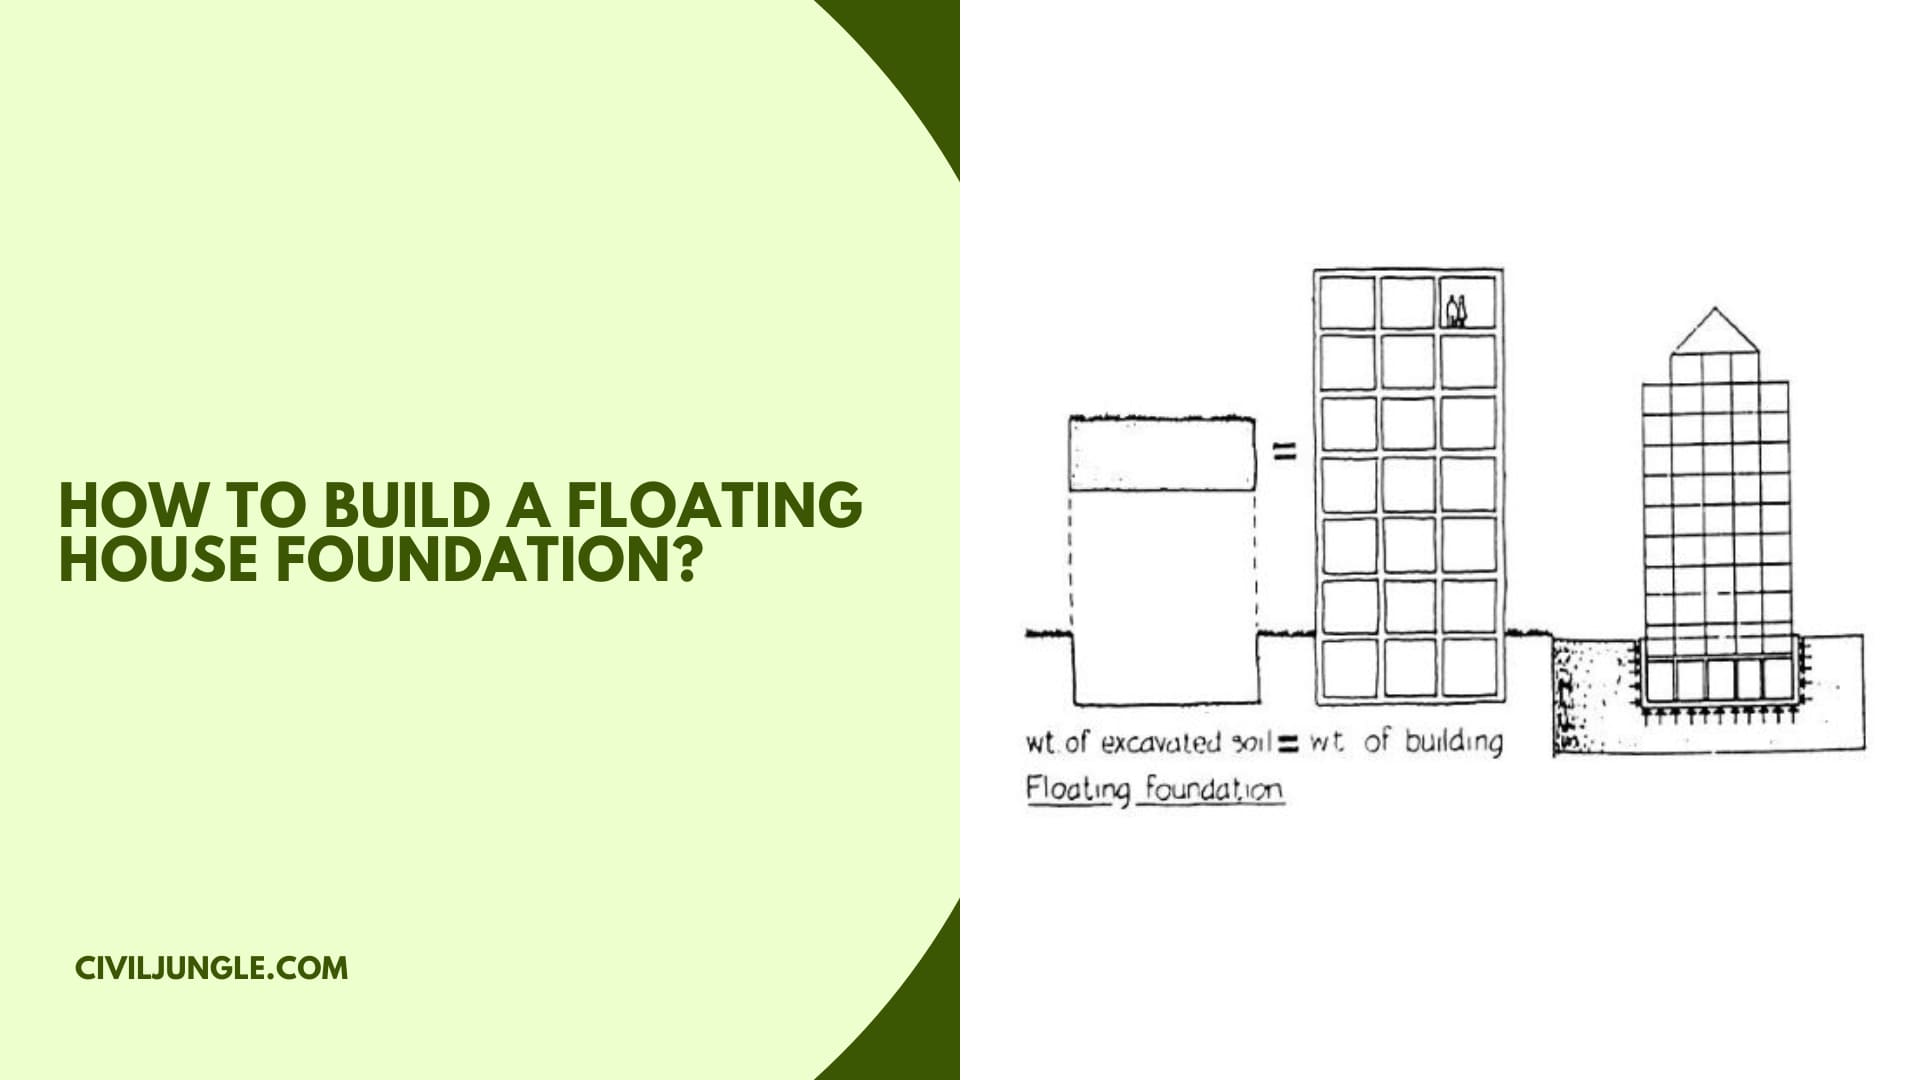 How to Build a Floating House Foundation?